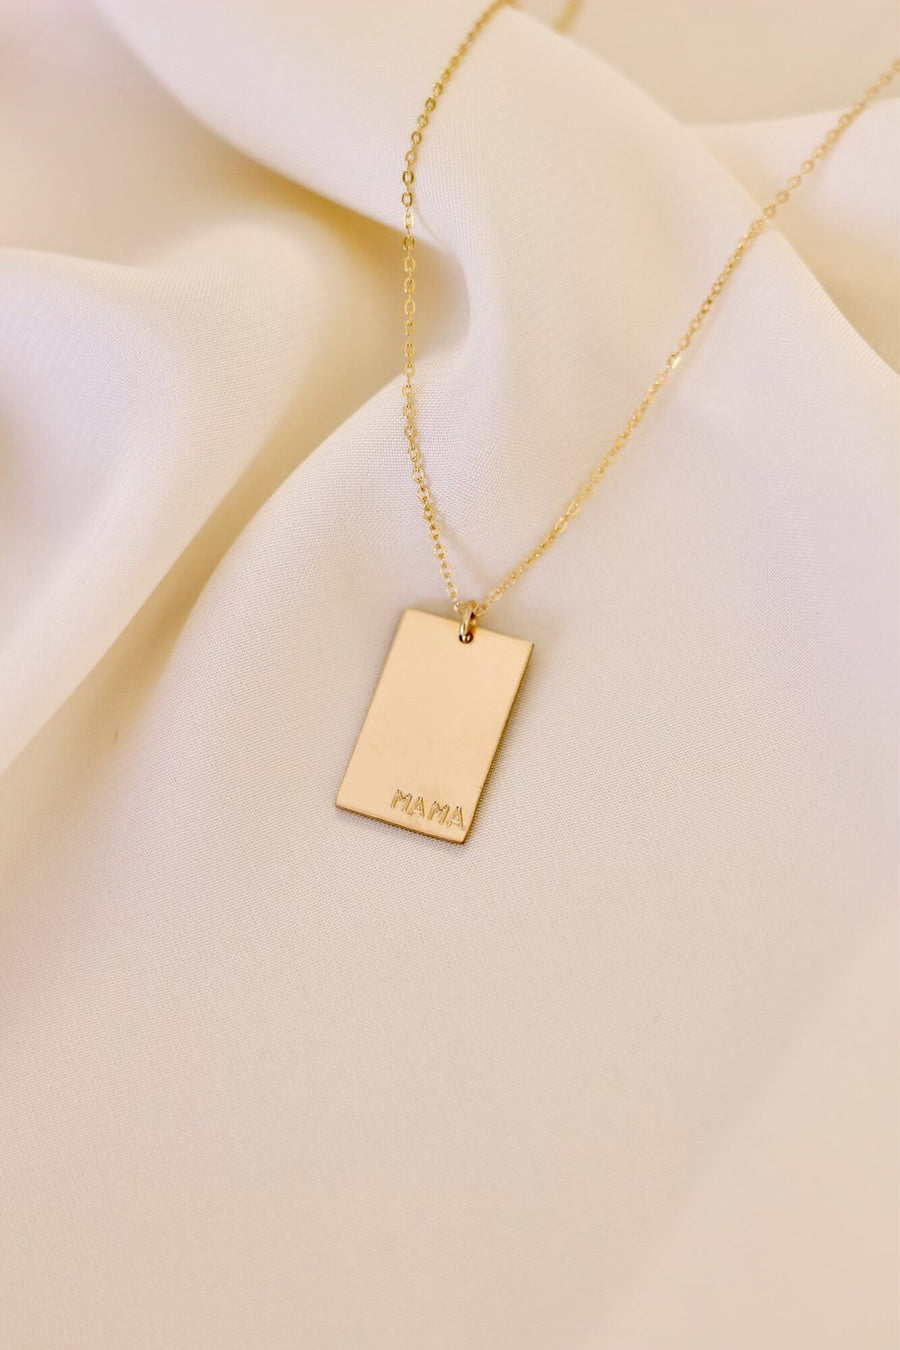 Goldie "MAMA" Necklace